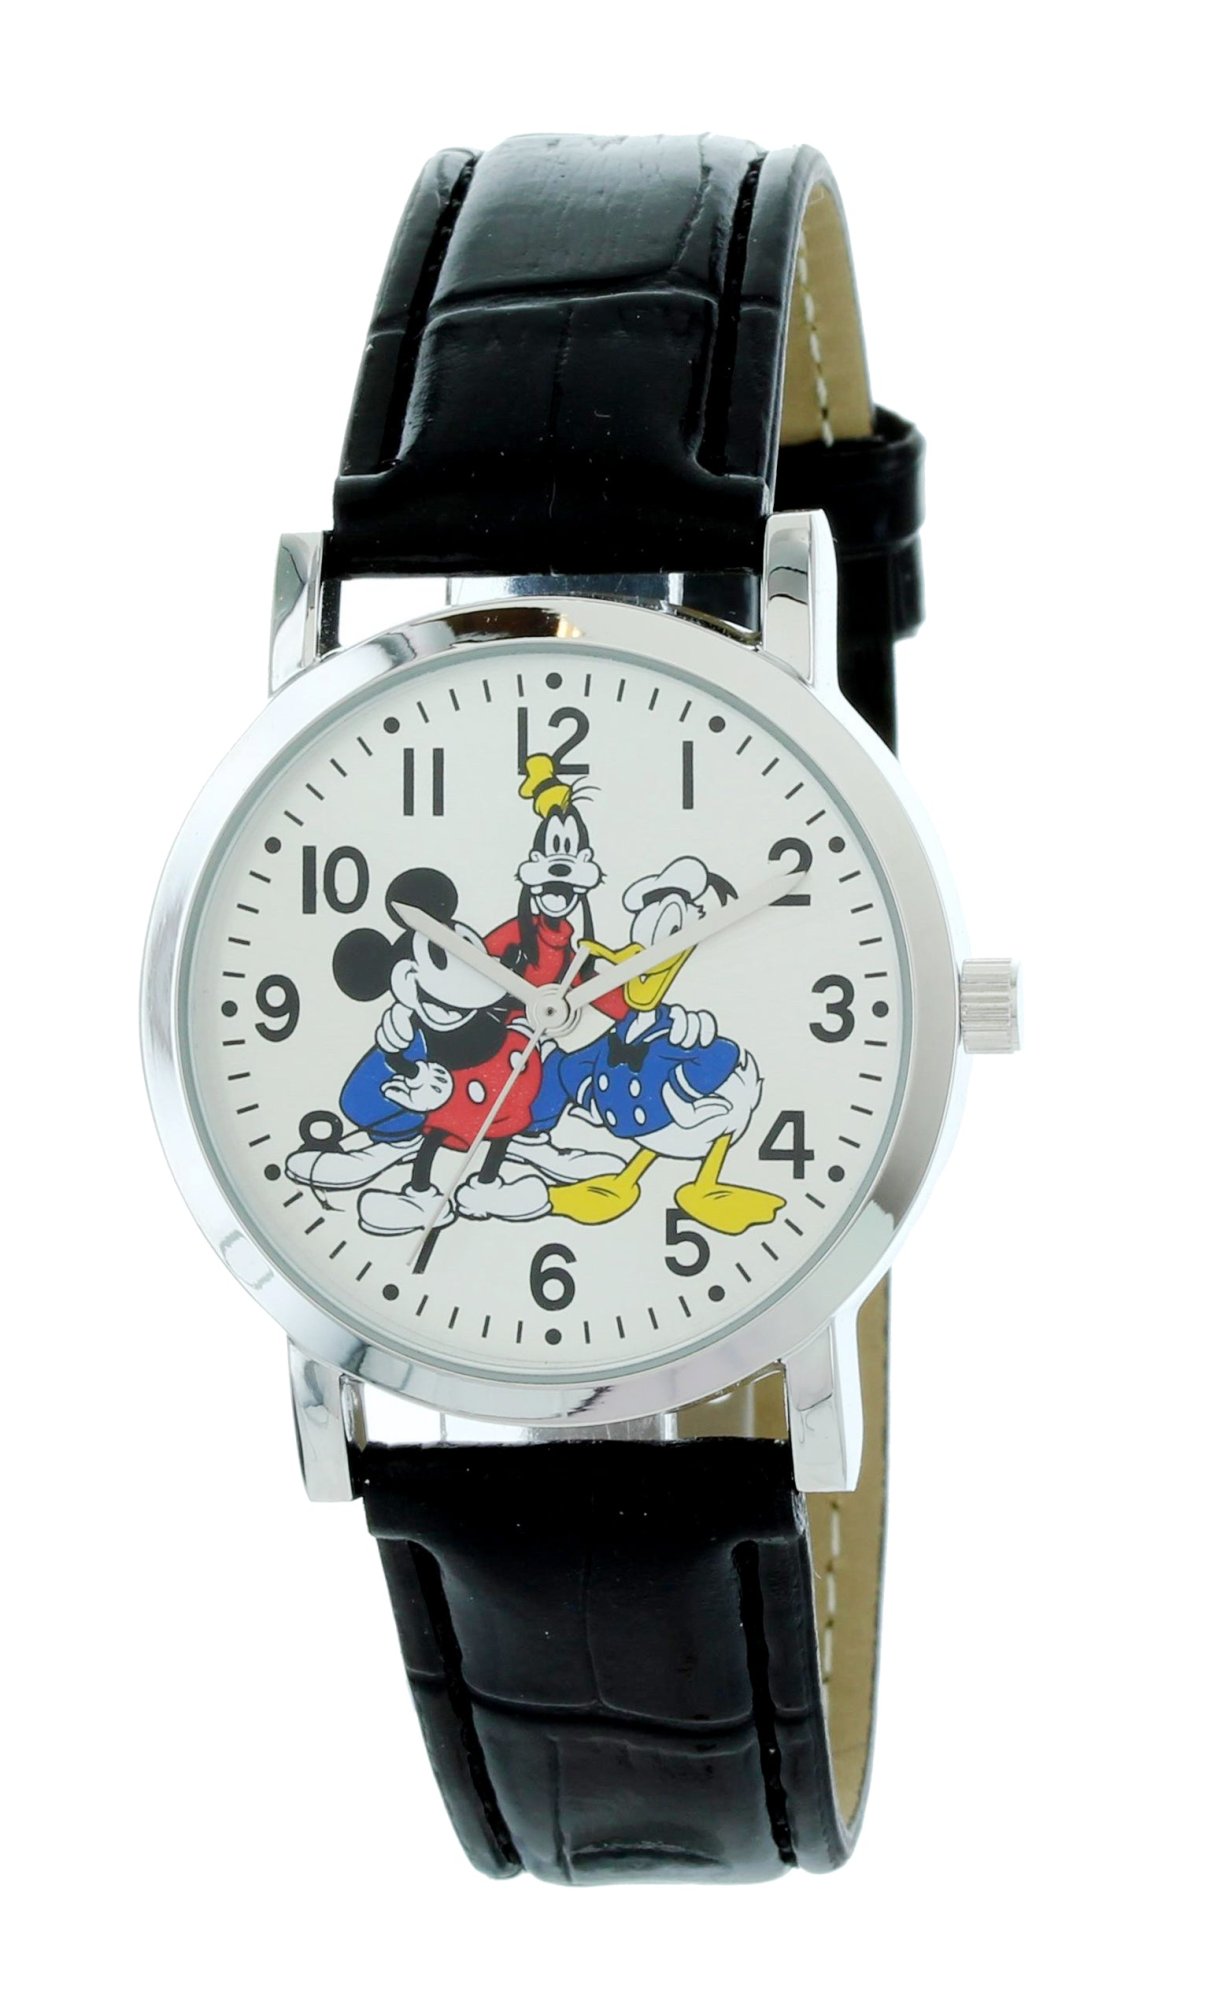 Model: Collectible Disney "Friends Forever" Watch